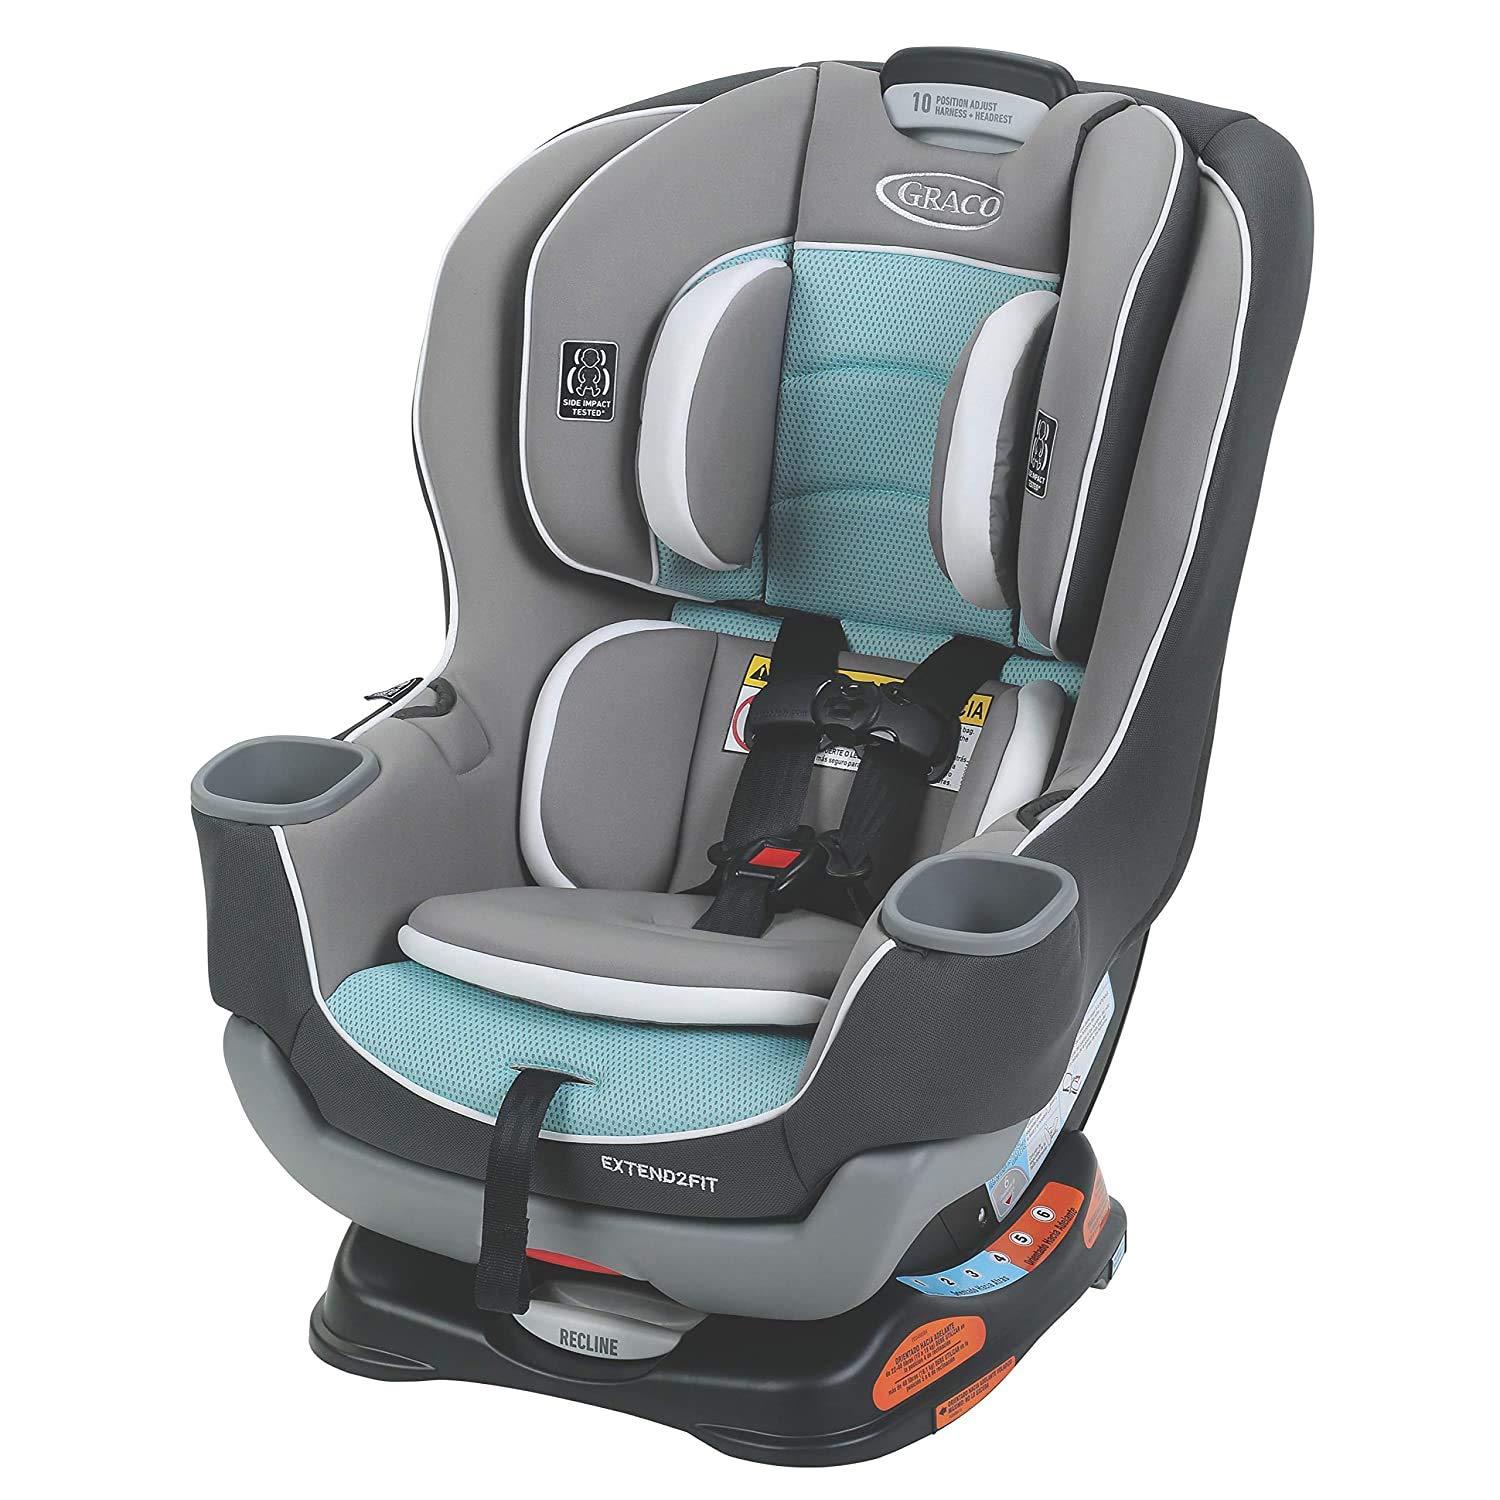 Graco Extend2Fit Convertible Car Seats for $129.99 Shipped